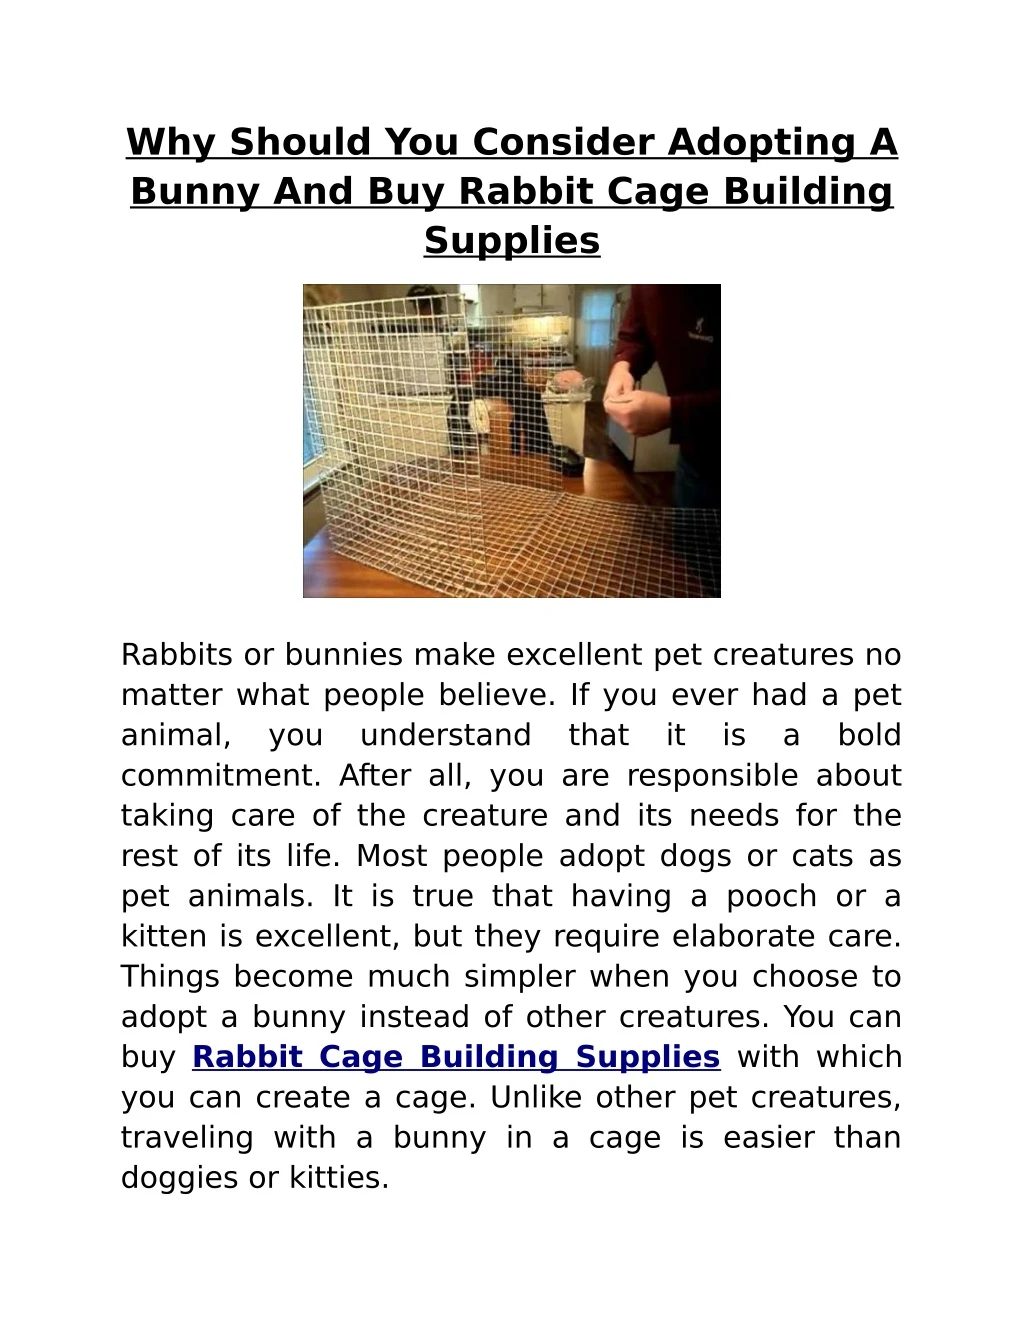 why should you consider adopting a bunny